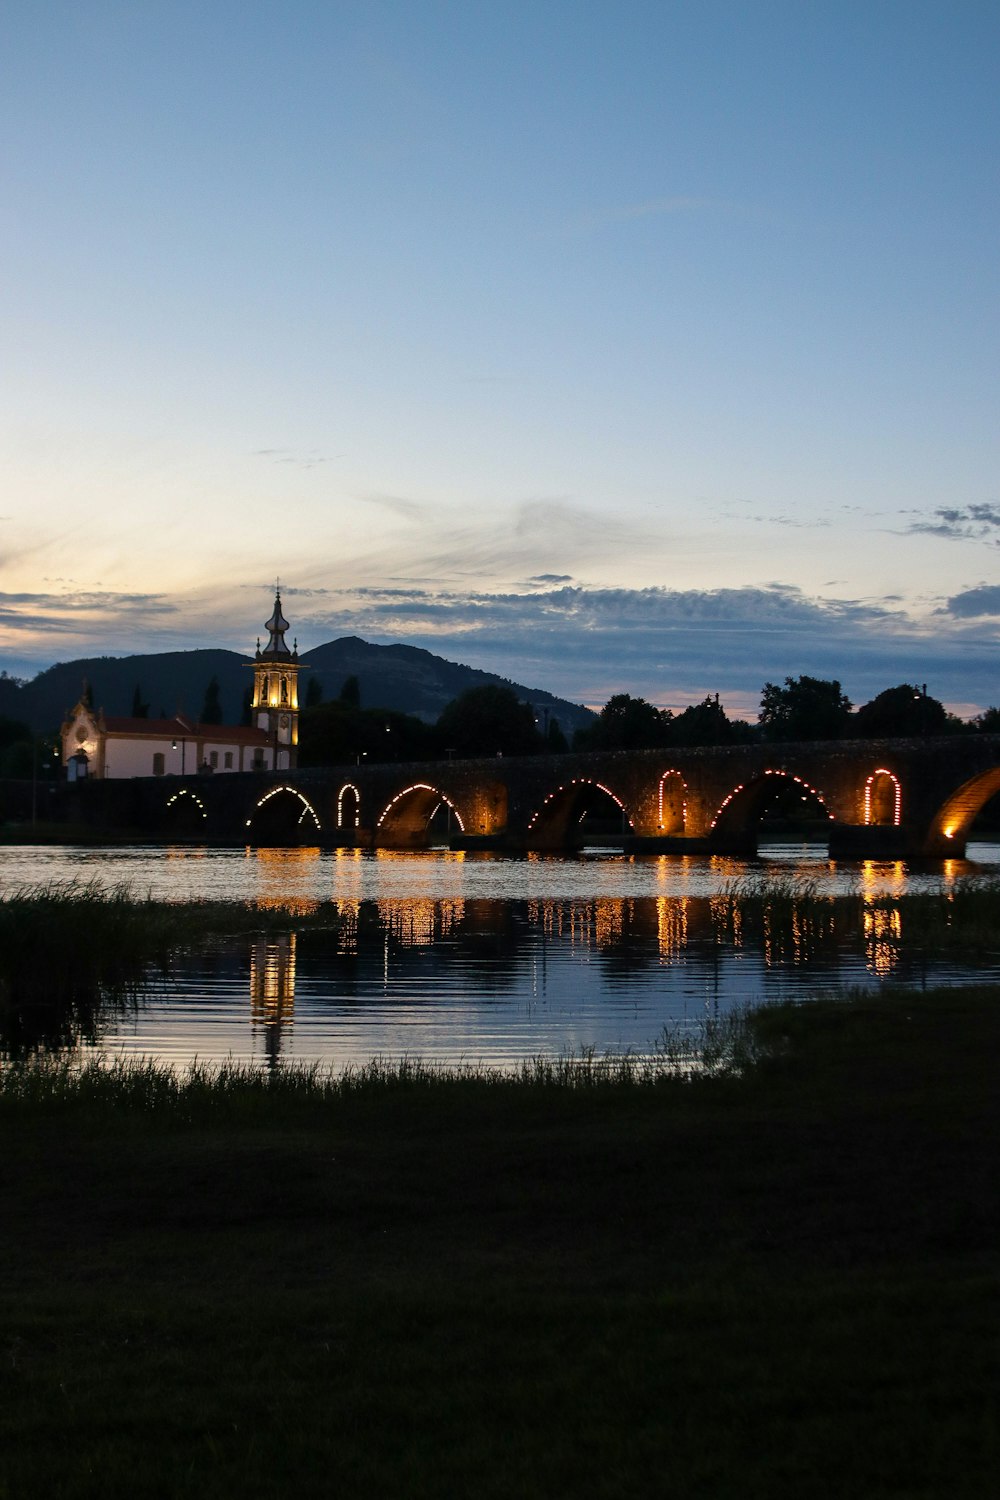 a bridge over a body of water with a clock tower in the background